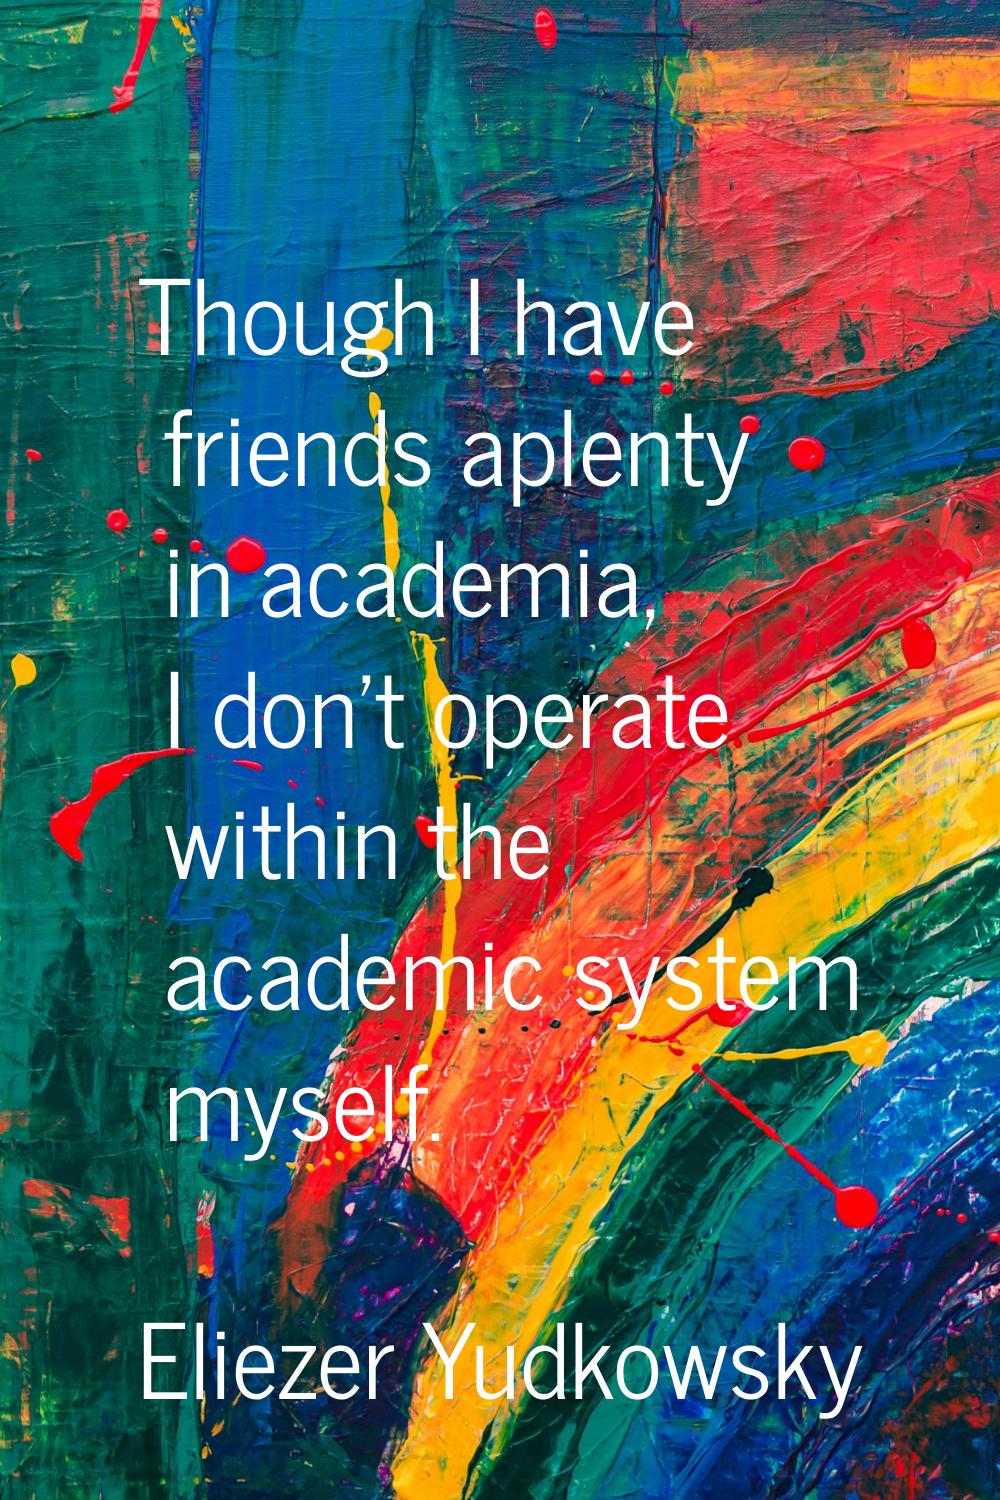 Though I have friends aplenty in academia, I don't operate within the academic system myself.